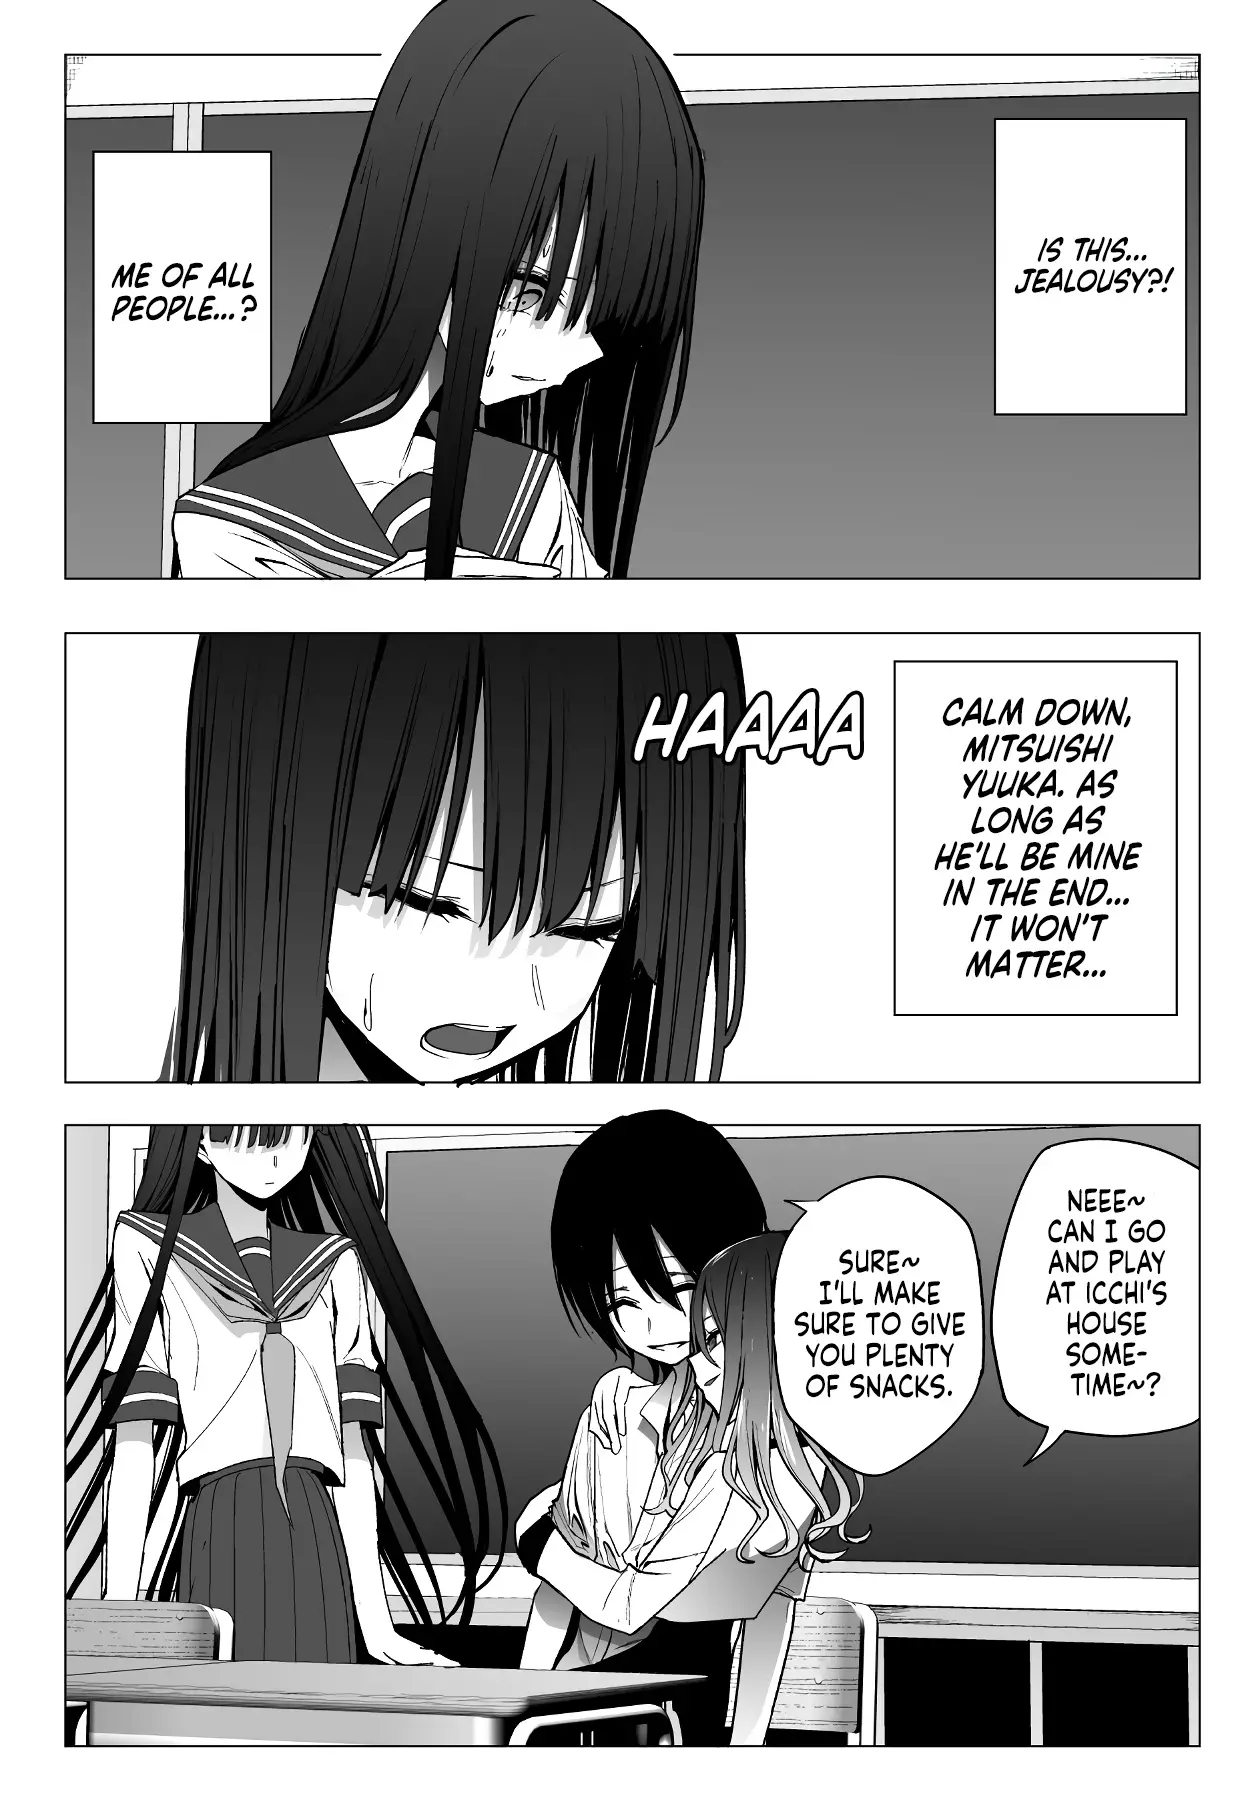 Mitsuishi-San Is Being Weird This Year - 24 page 8-5995e9ef